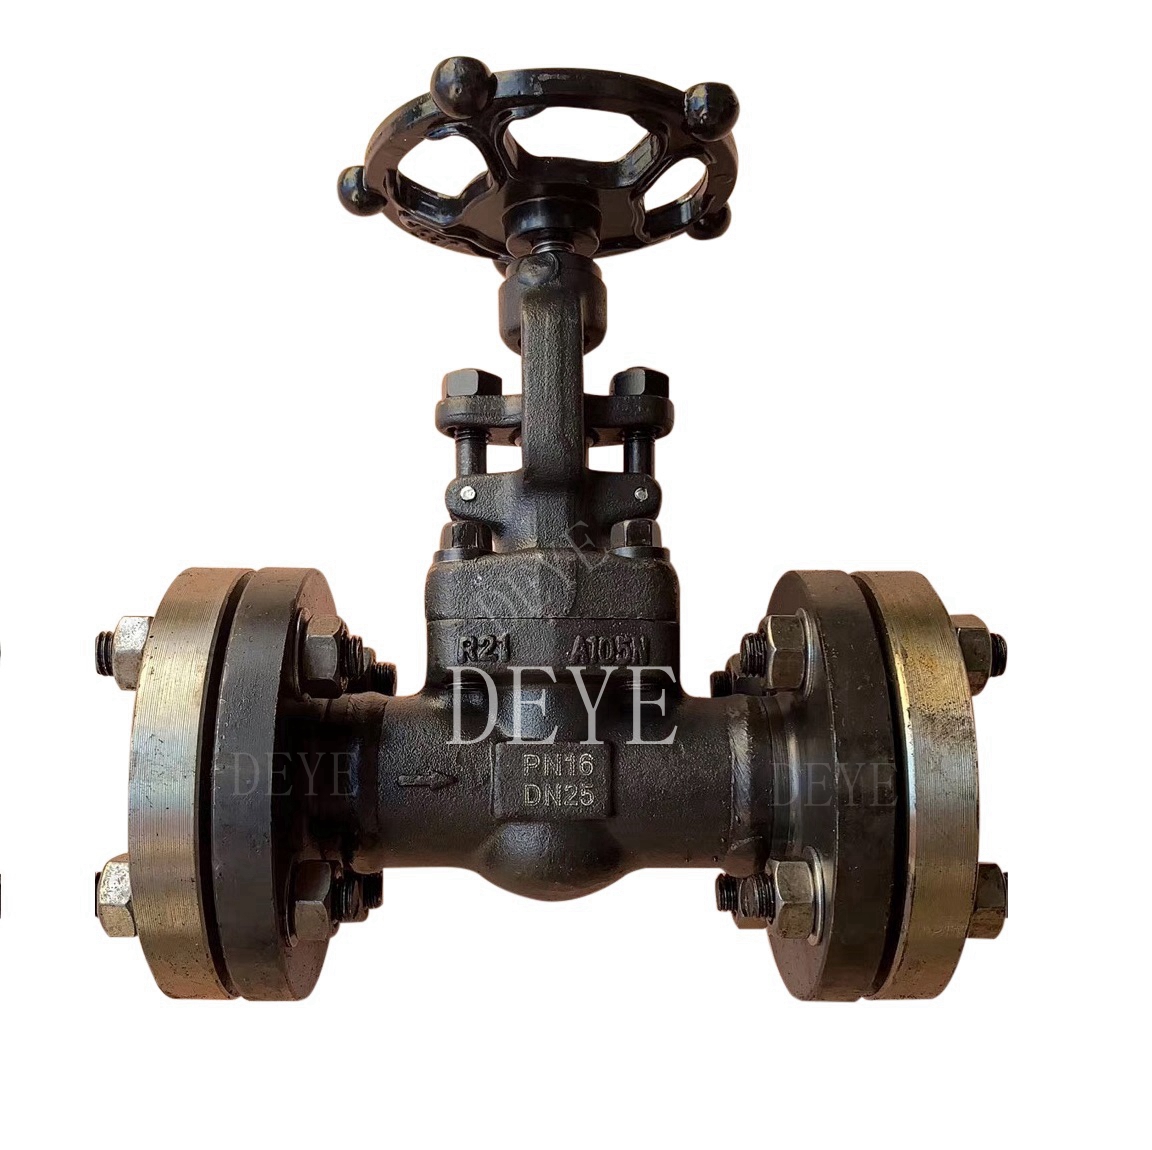 Factory made hot-sale 4inch Ball Valve -
 A105 Forged steel Gate Valve with counter flanges GVC-0016-1F – Deye